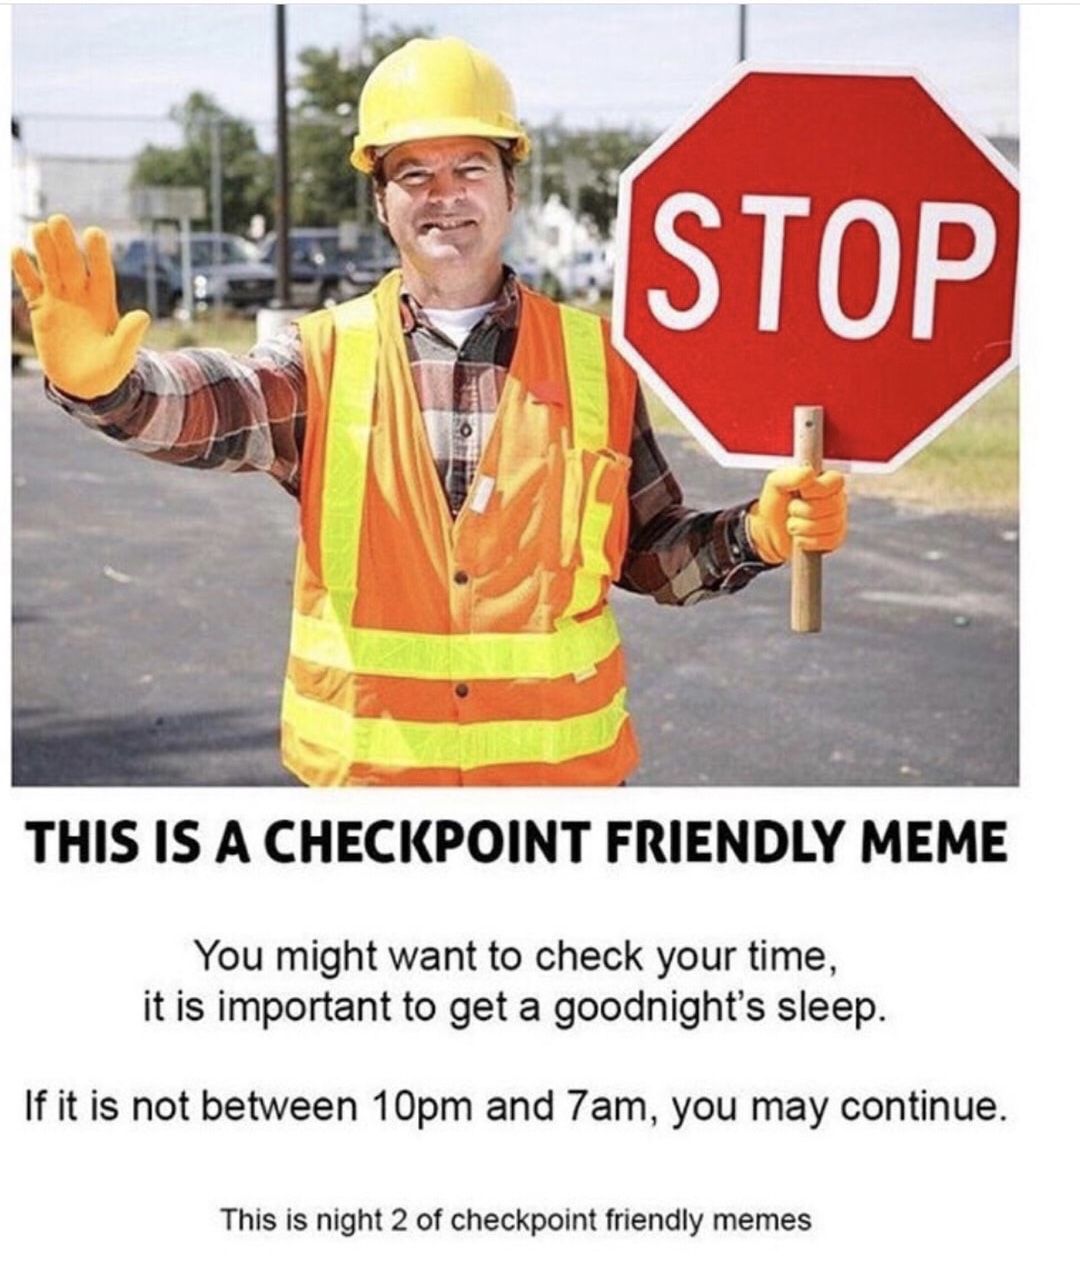 meme stream - checkpoint friendly meme - Stop This Is A Checkpoint Friendly Meme You might want to check your time, it is important to get a goodnight's sleep. If it is not between 10pm and 7am, you may continue. This is night 2 of checkpoint friendly mem